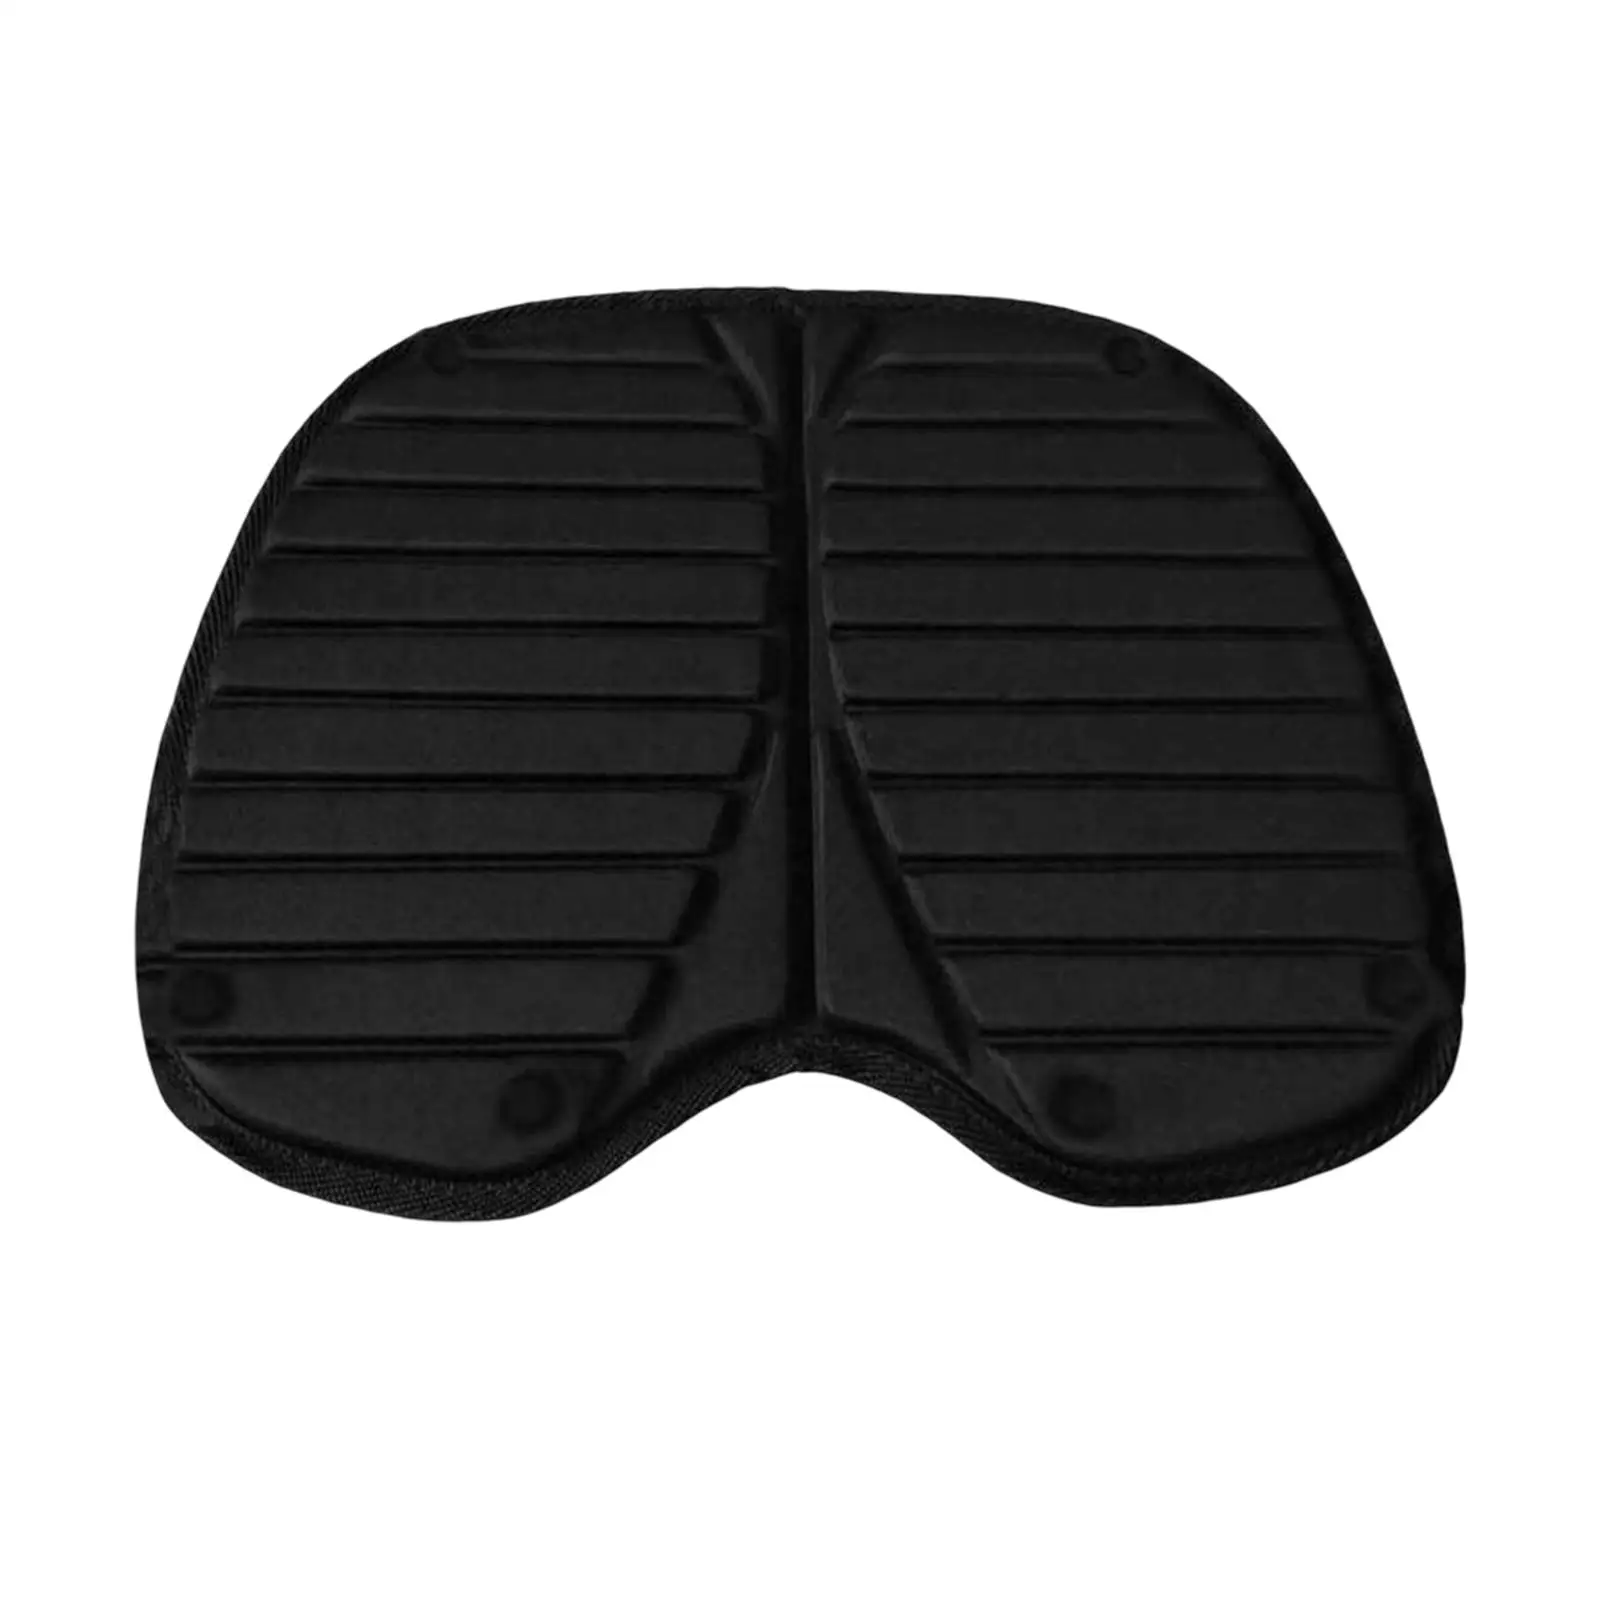 Portable Boat Seat Cushion Canoe Pad Foldable Wear Resistant Breathable Pad Soft Boat Seat Cushion for Outdoor Kayak Canoe Boat